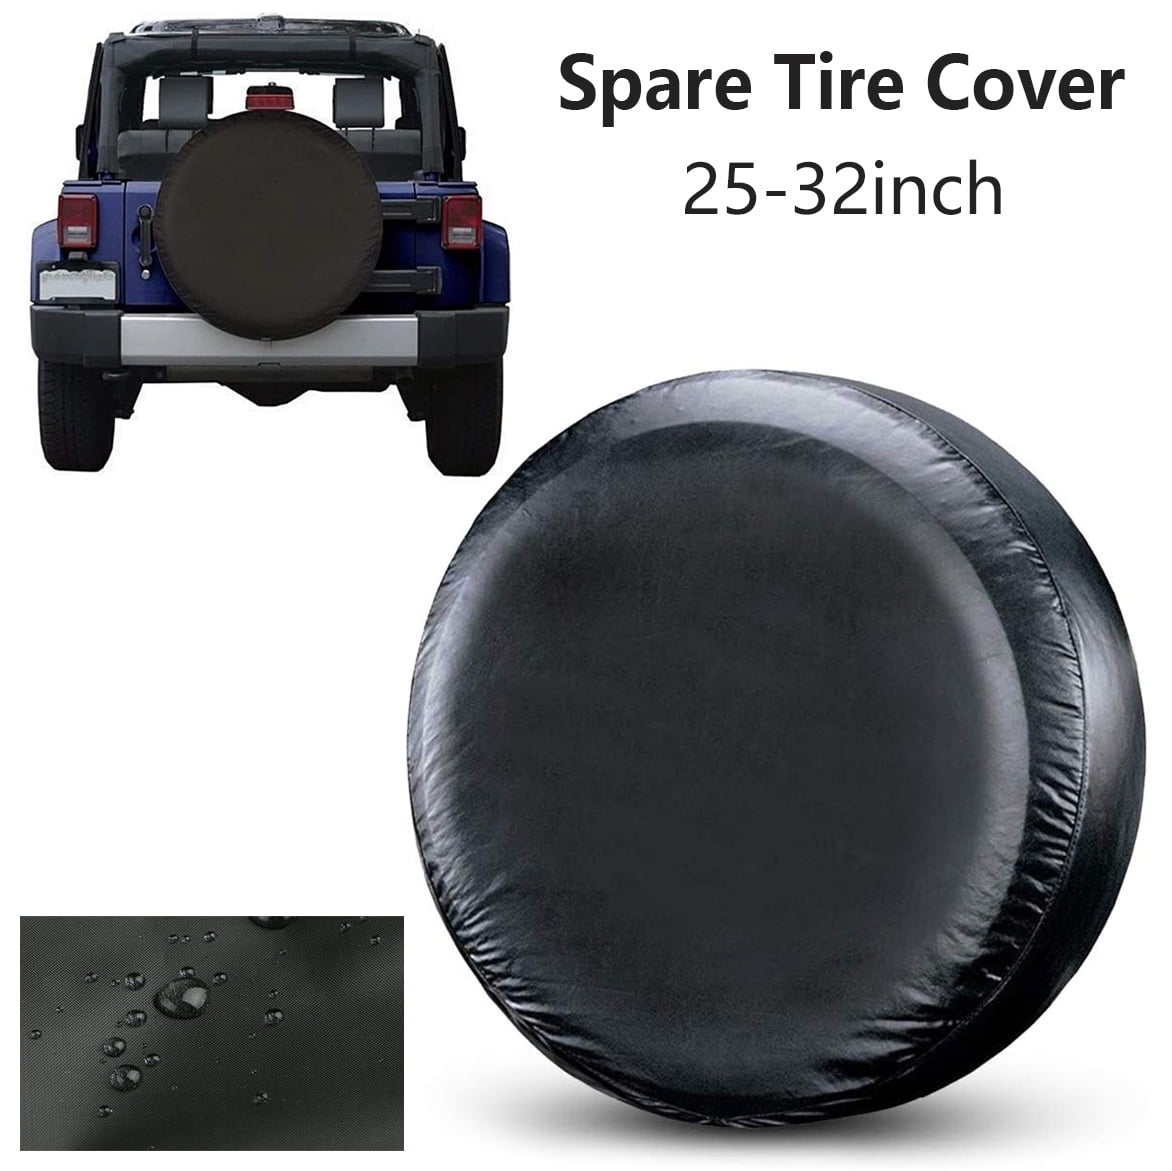 Send us your ZIP! Texas Love jeep tire cover 